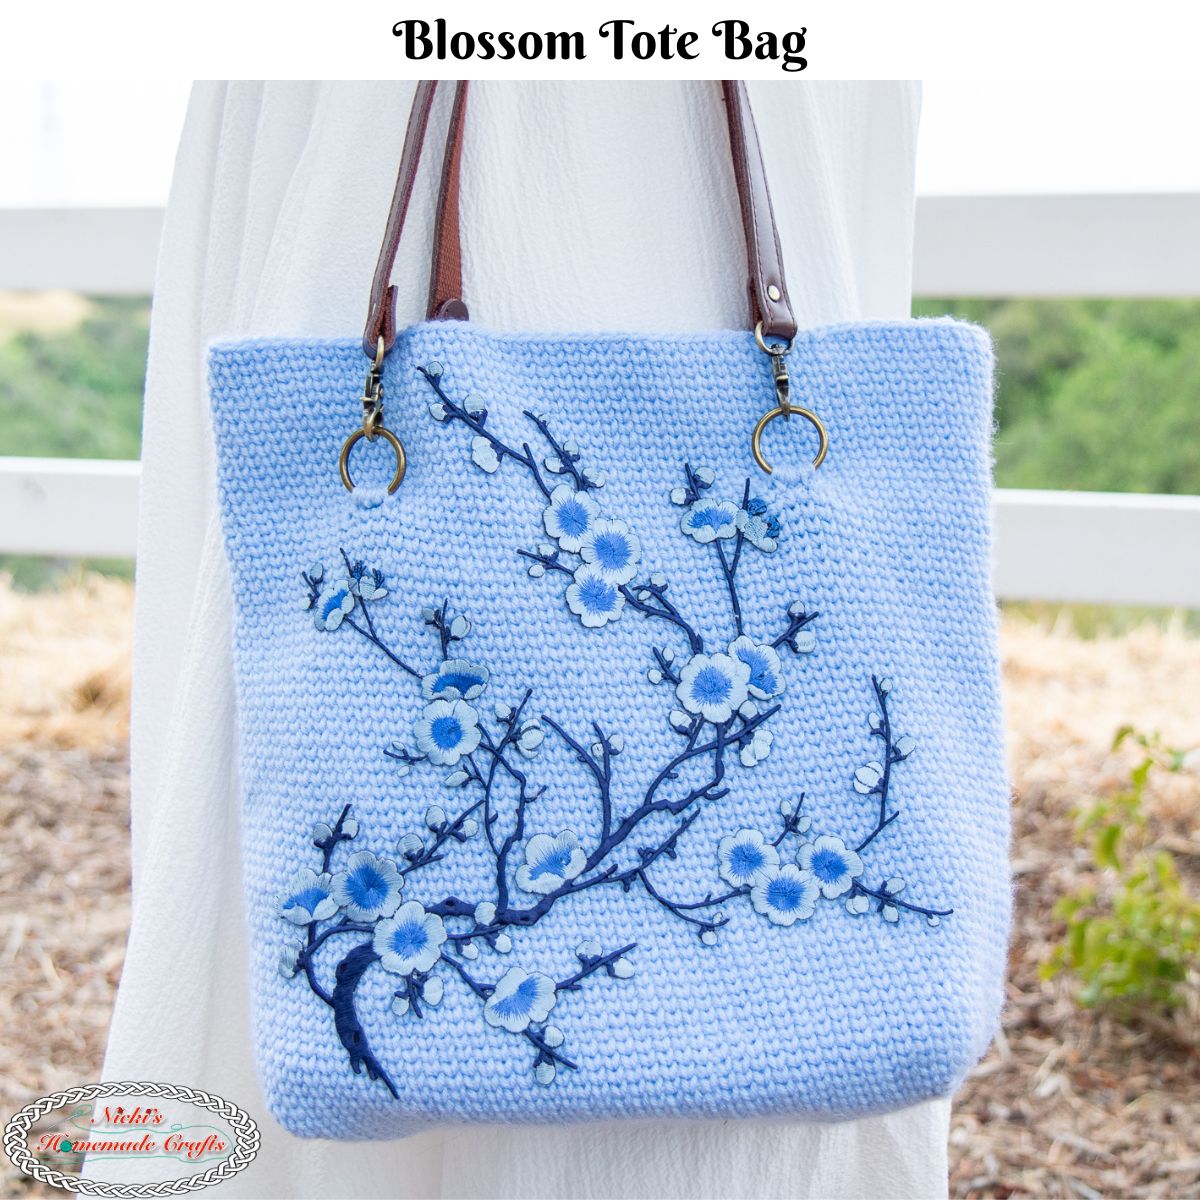 Hobo bag free sewing pattern - make your own stylish bag